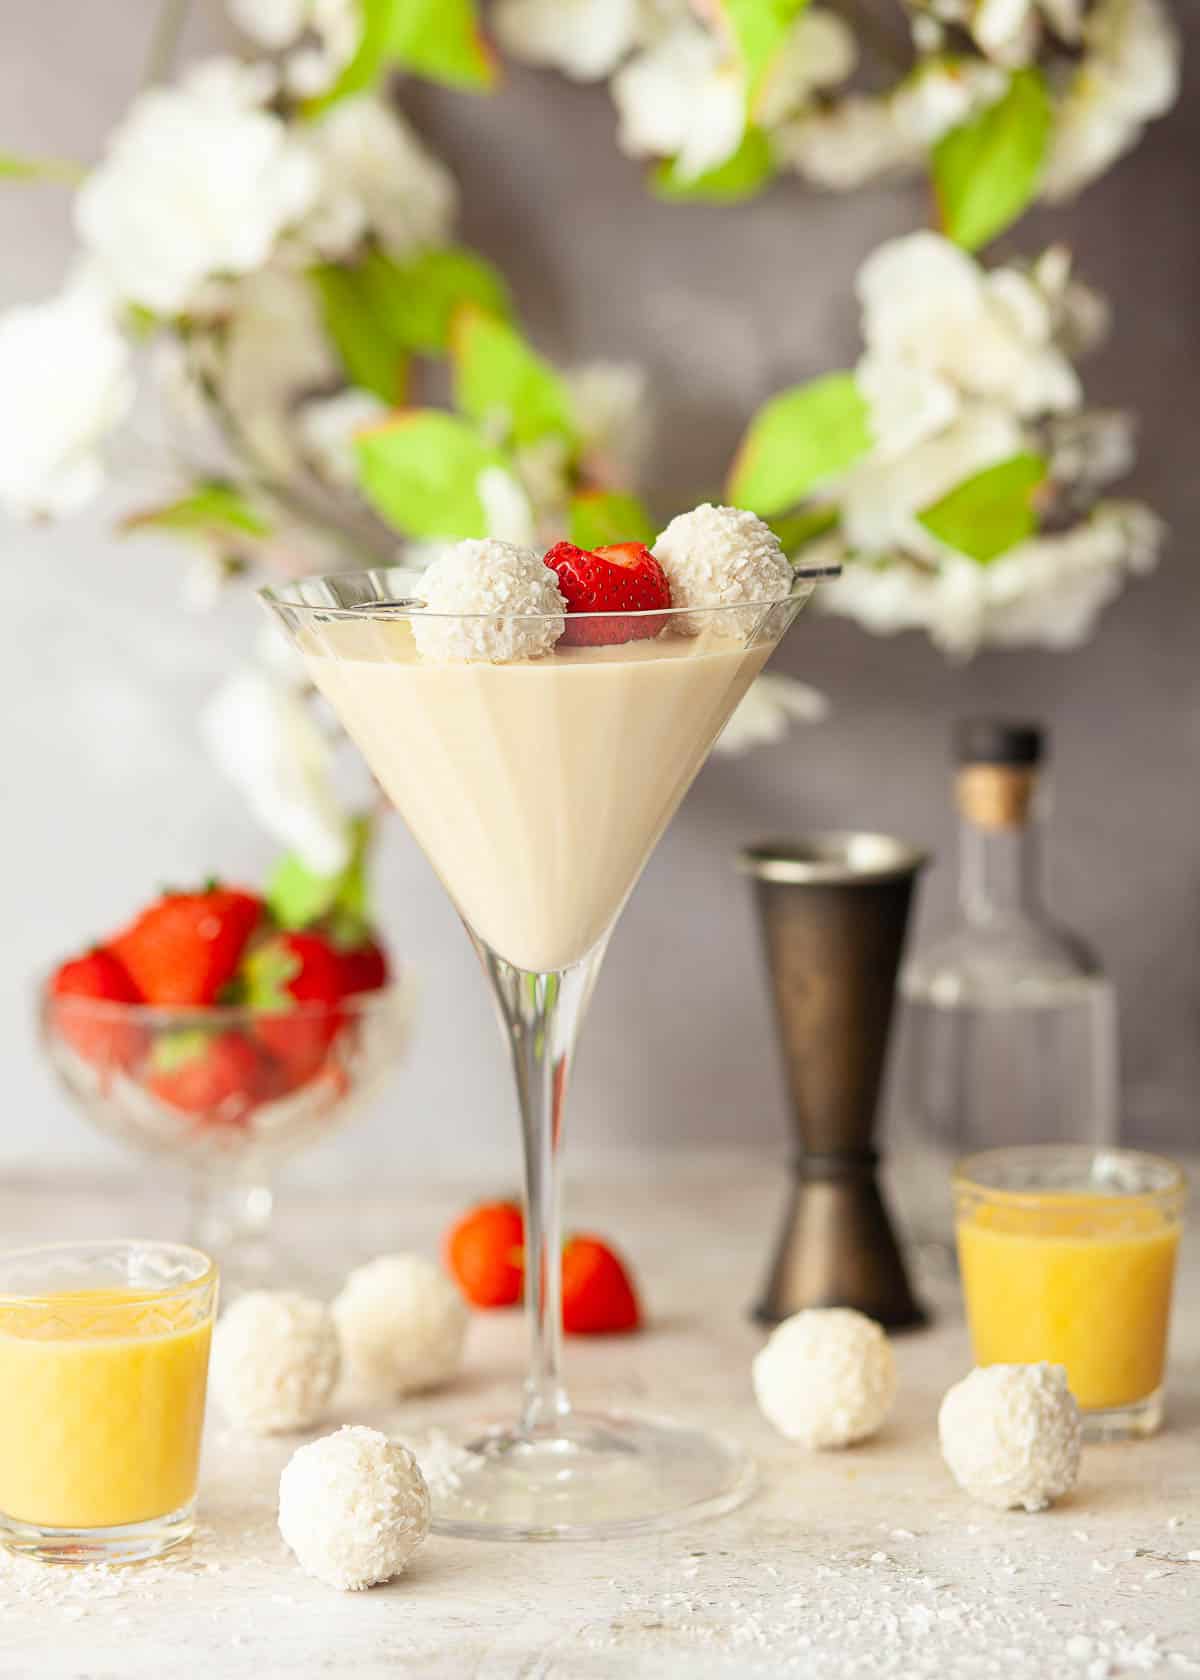 A creamy advocaat cocktail topped with chocolates and starwberries.